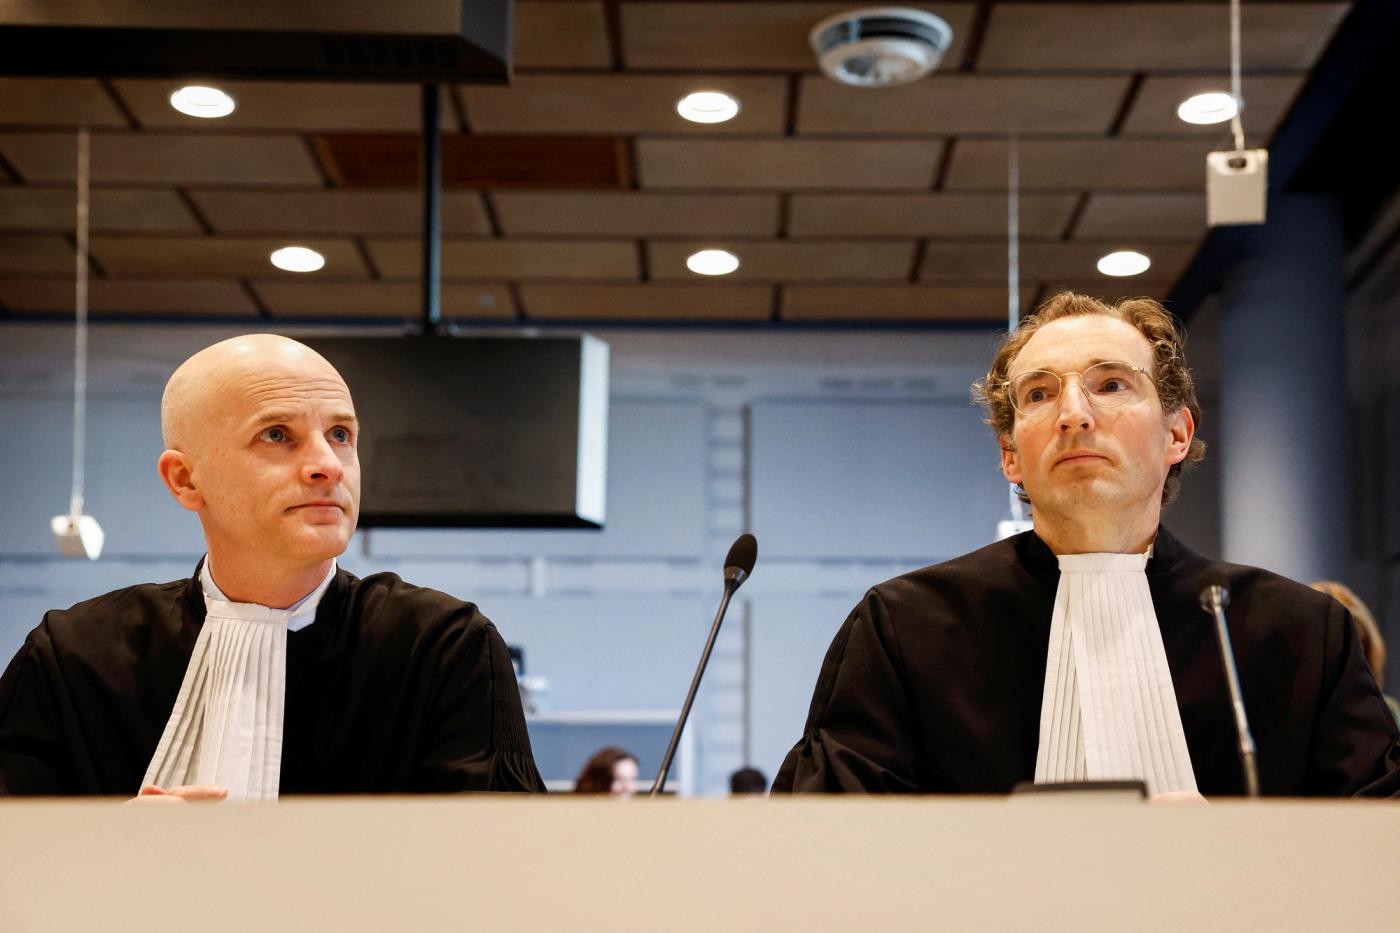 Lawyers of the state Erik Koppe and Reimer Veldhuis look on amid the court case of human rights groups who seek to block the Dutch government from exporting F-35 fighter jet parts to Israel, which they claim enables war crimes in the besieged Gaza Strip, in The Hague, Netherlands